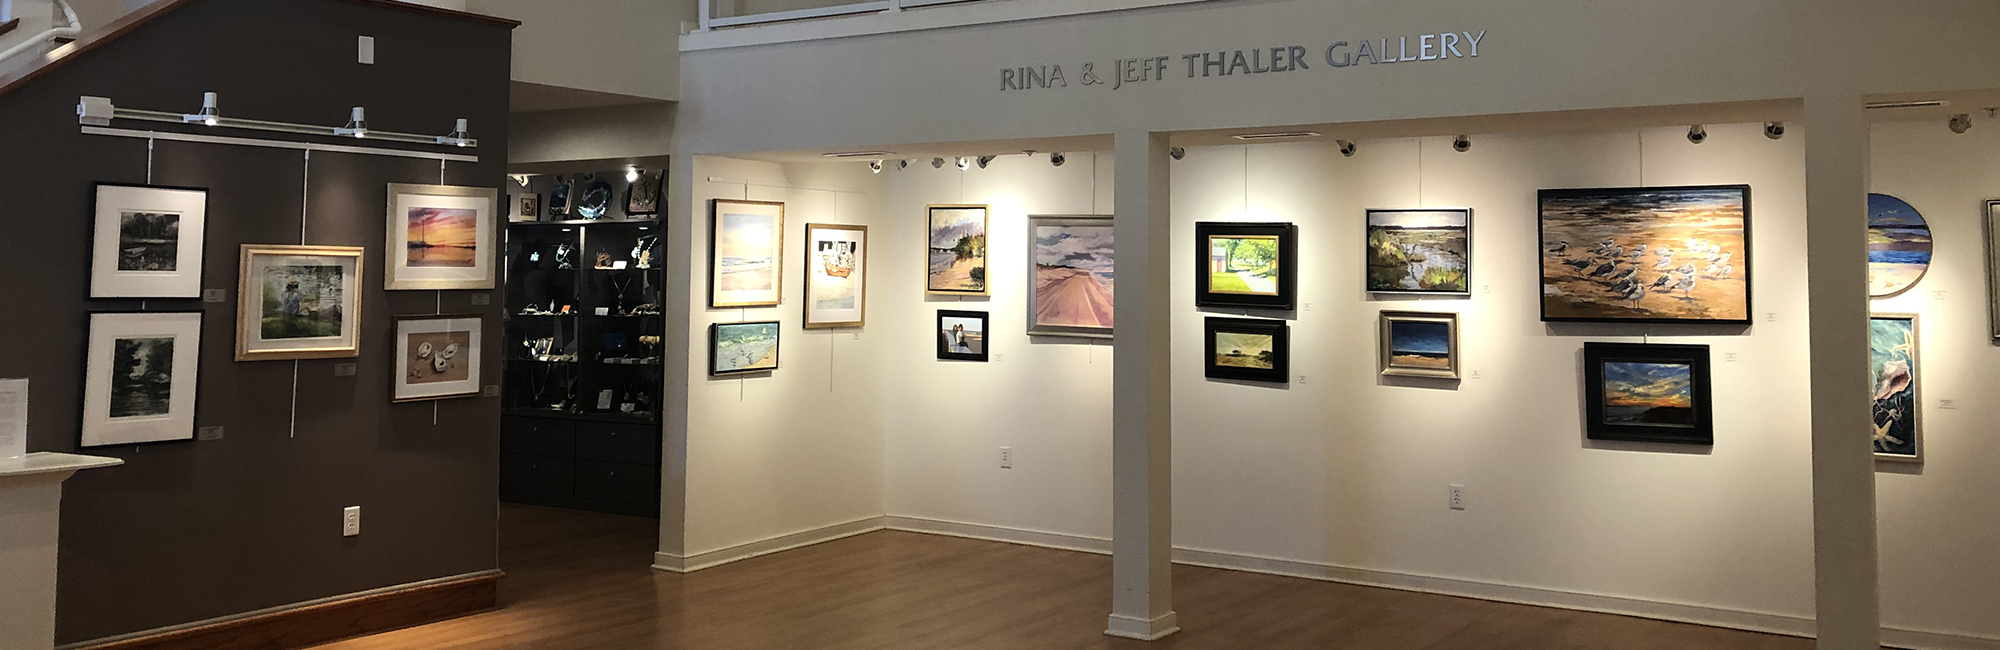 Featured in the Thaler Gallery / Working Artists Forum